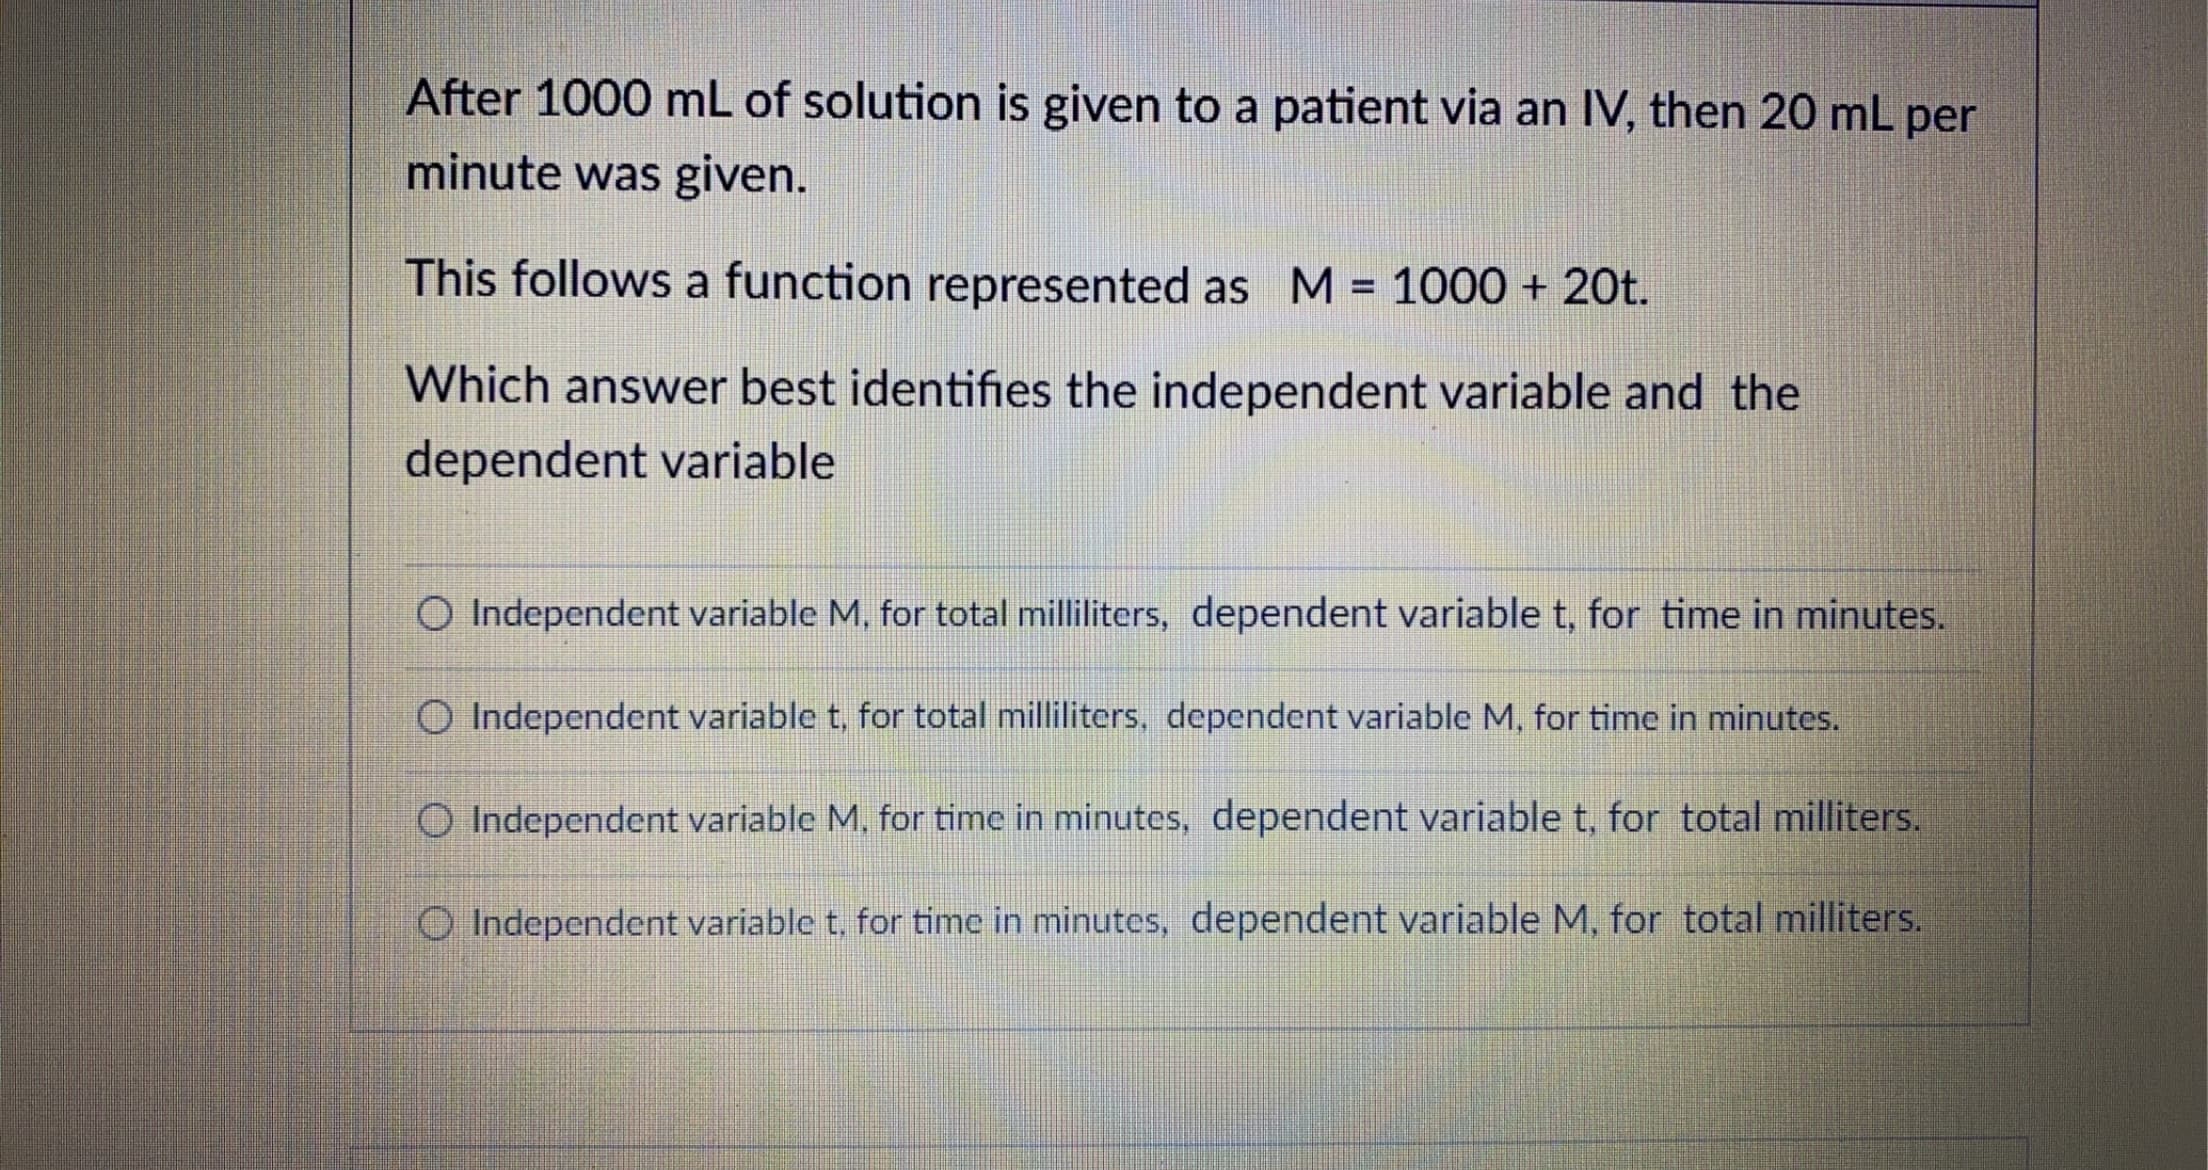 After 1000 mL of solution is given to a patient via an IV, then 20 mL per
minute was given.
This follows a function represented as M = 1000 + 20t.
Which answer best identifies the independent variable and the
dependent variable
O Independent variable M, for total milliliters, dependent variable t, for time in minutes.
O Independent variable t, for total milliliters, dependent variable M, for time in minutes.
O Independent variable M, for time in minutes, dependent variable t, for total milliters.
O Independent variable t, for time in minutes, dependent variable M, for total milliters.
